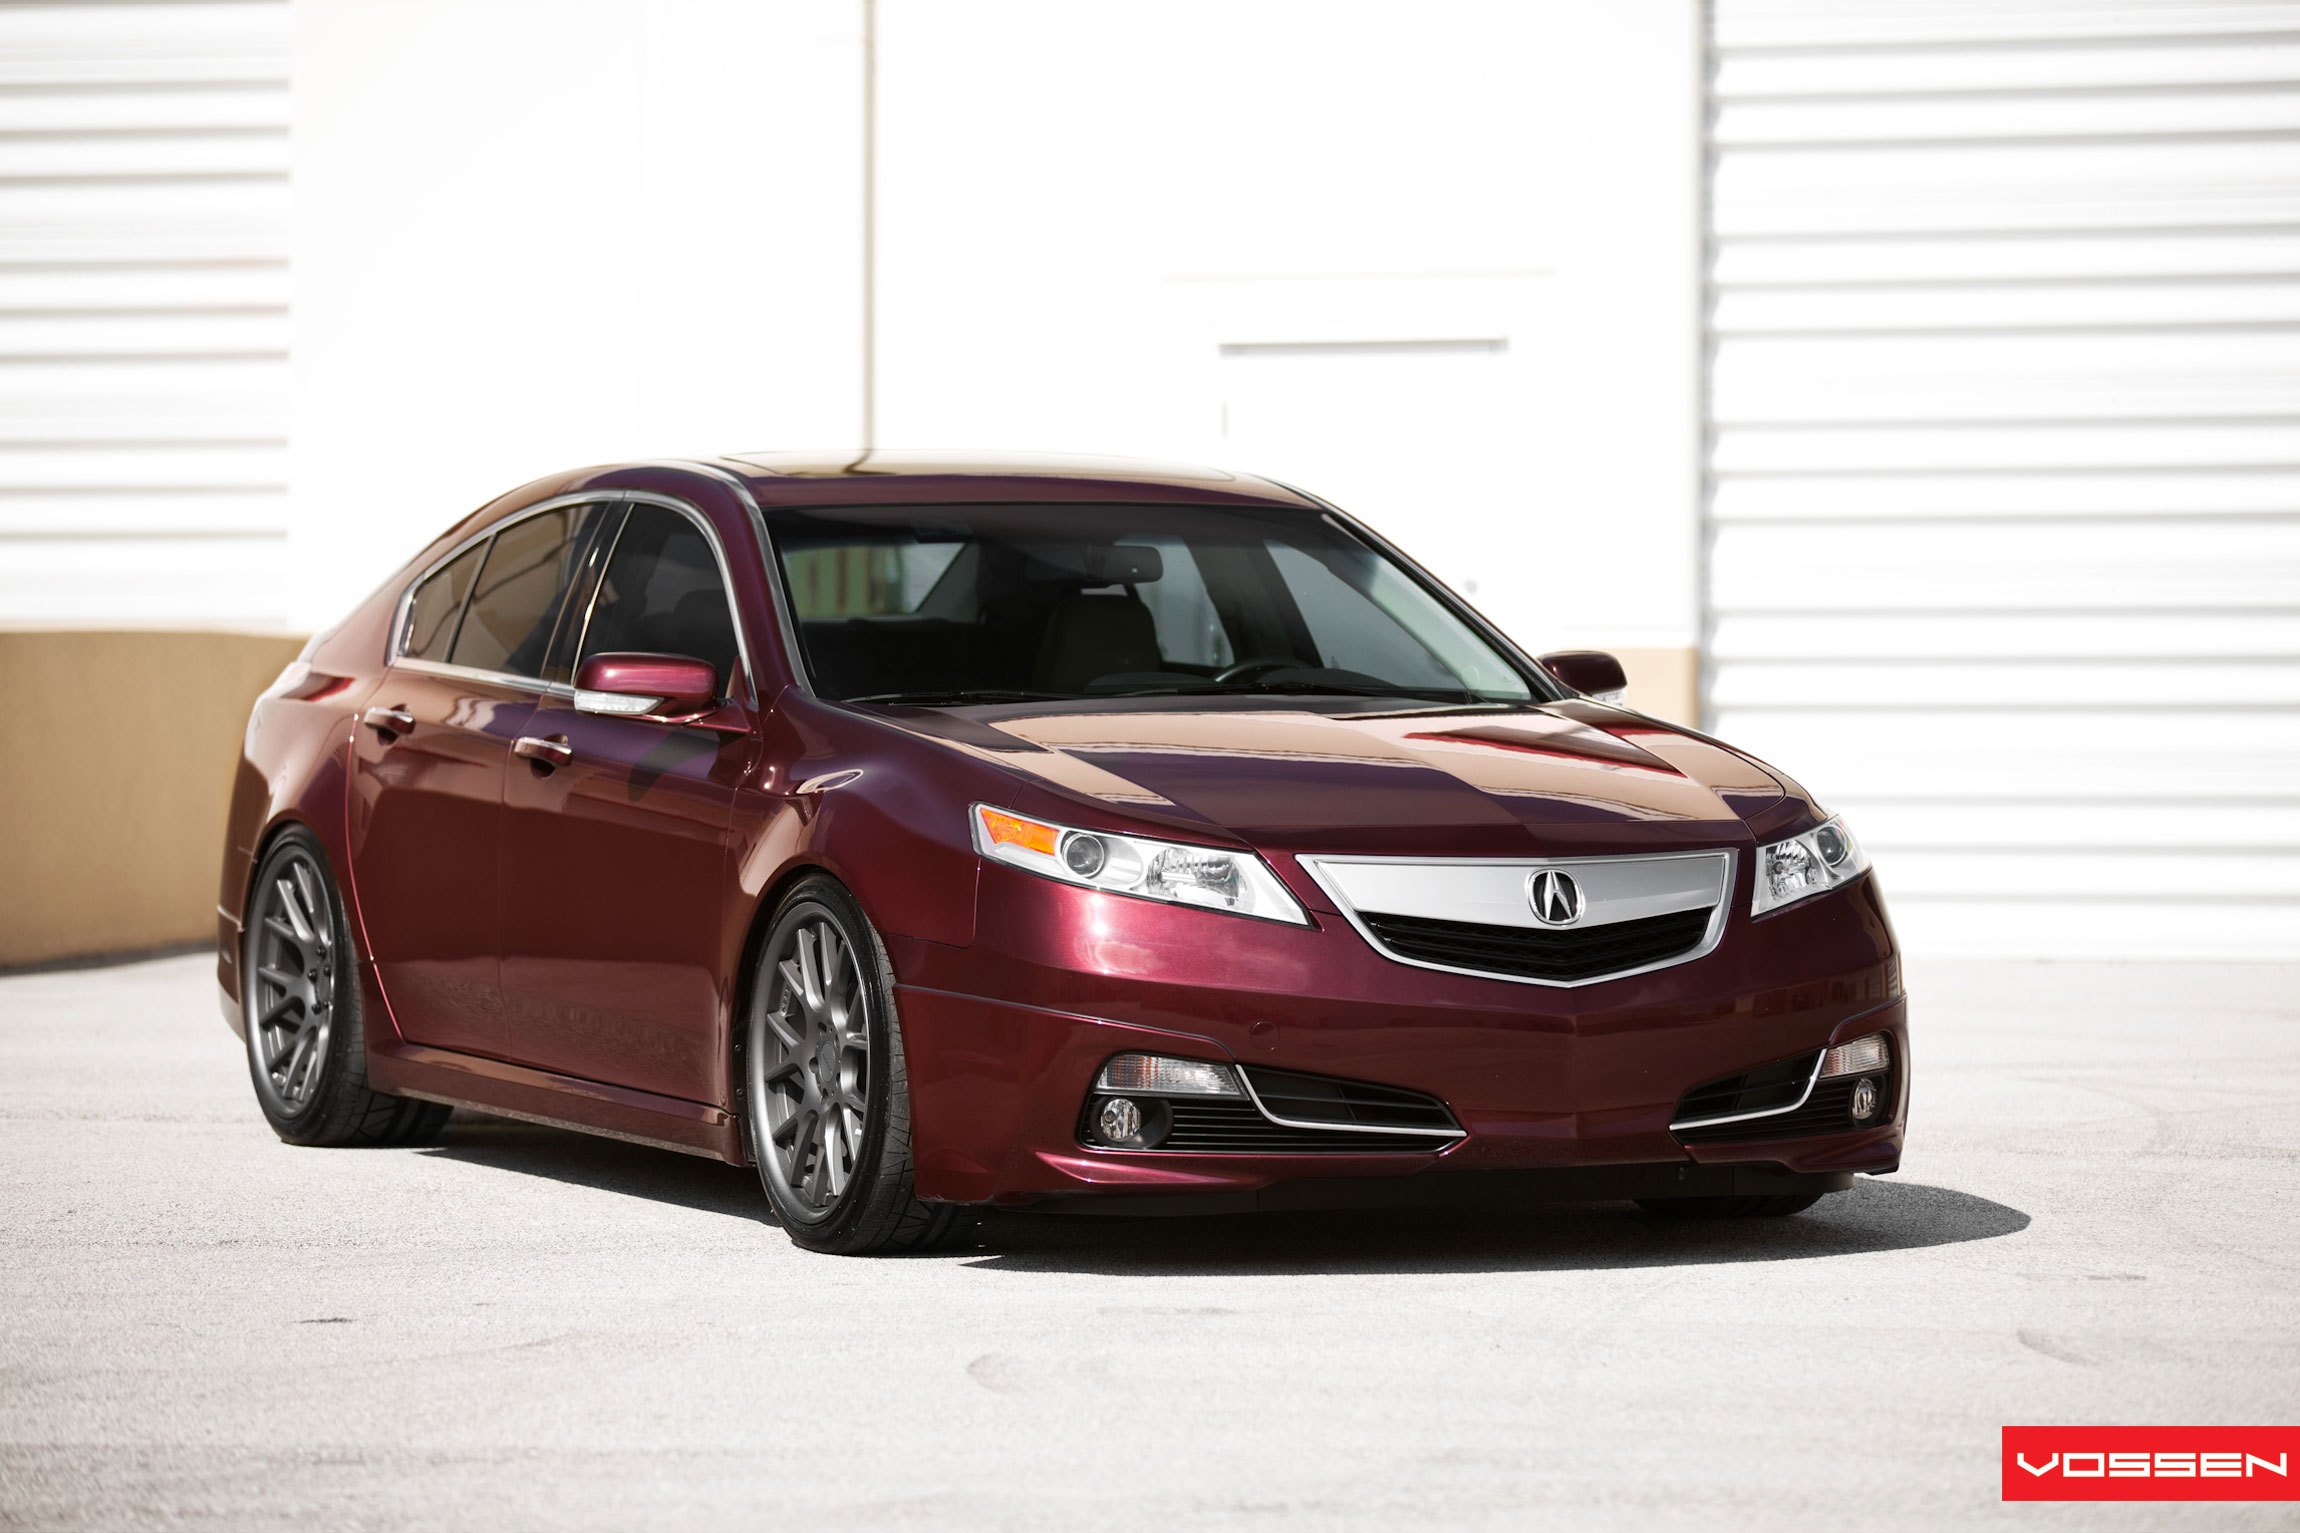 Custom Front Bumper on Red Acura TL - Photo by Vossen